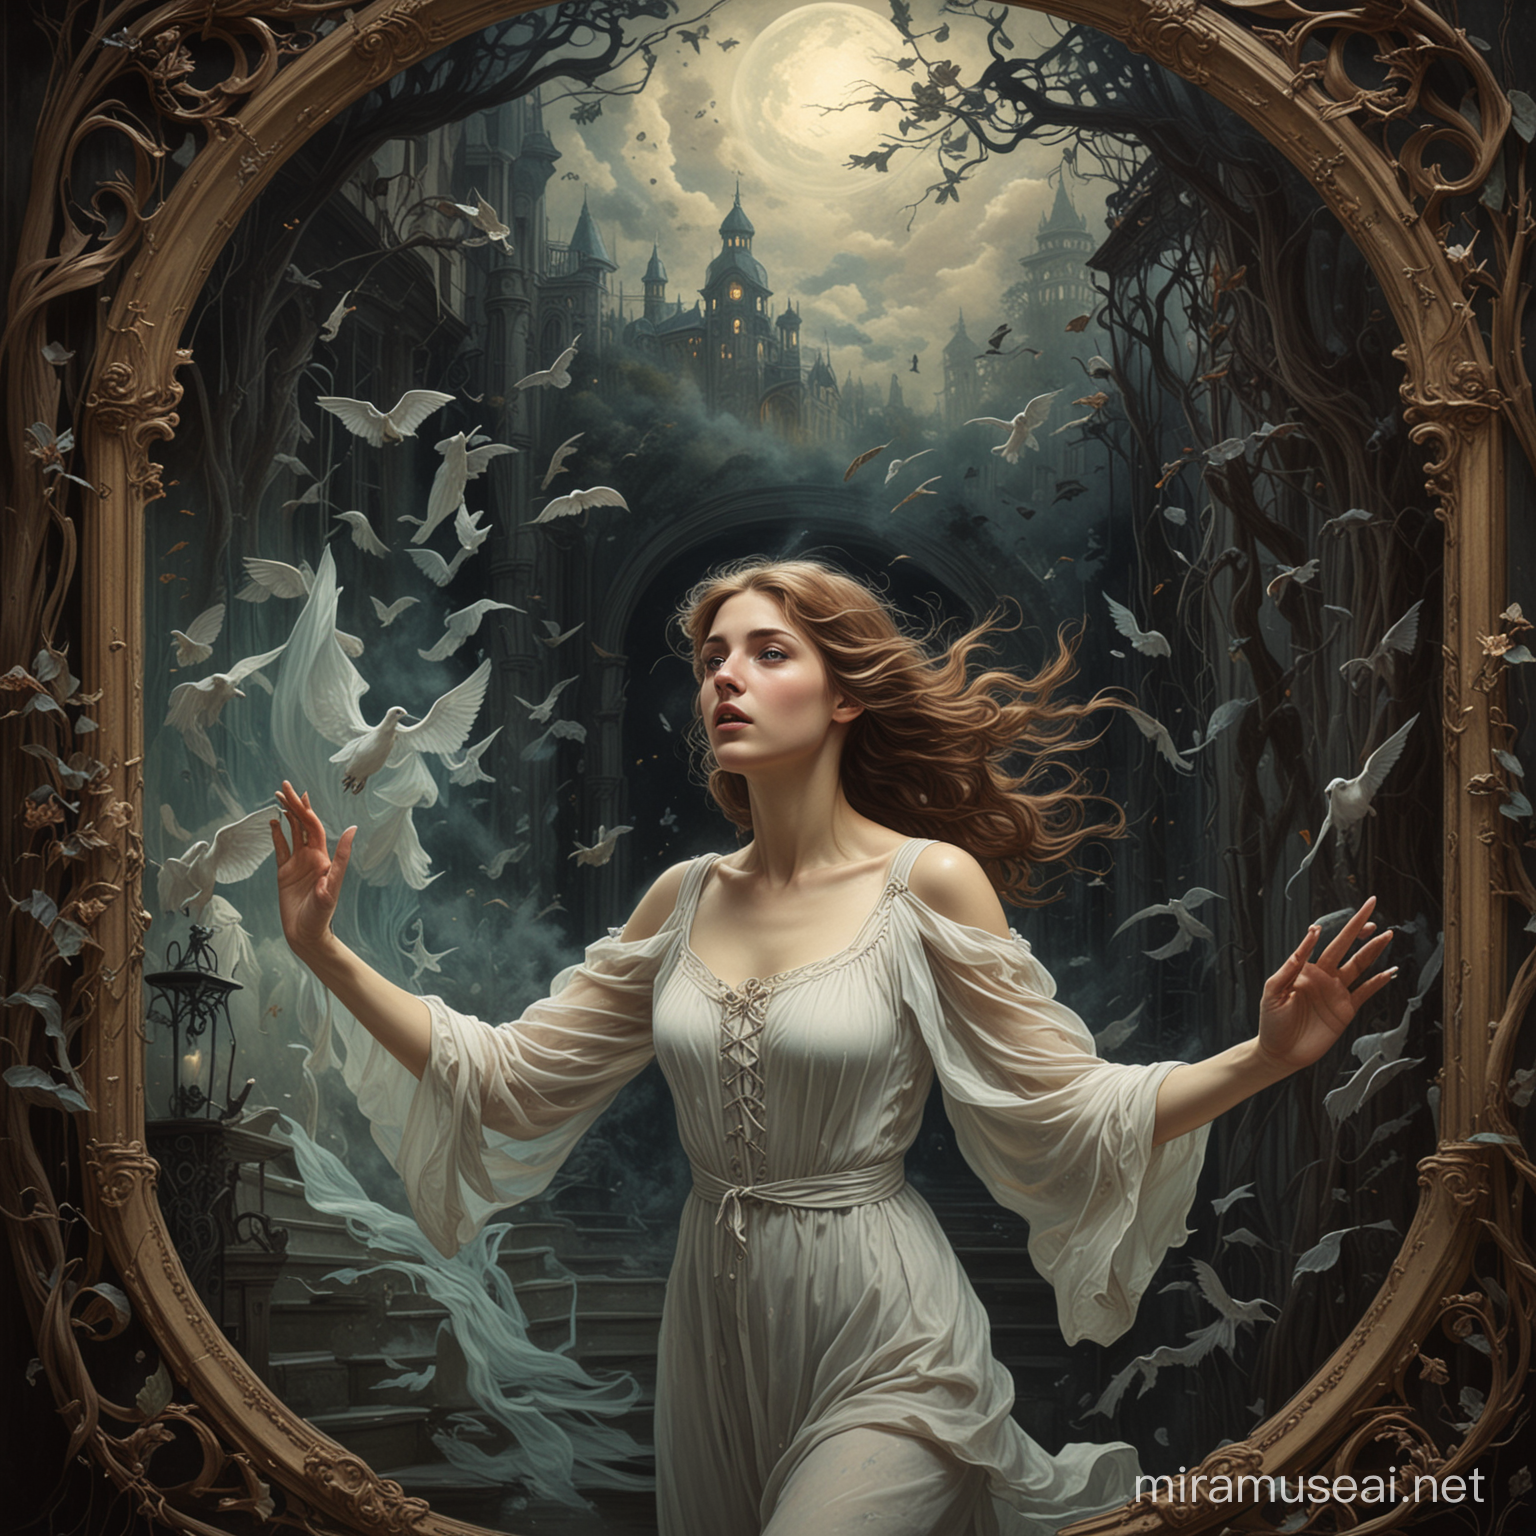 art nouveau style, beautiful young woman, disappearing into haunted painting, dark magic, nightmares